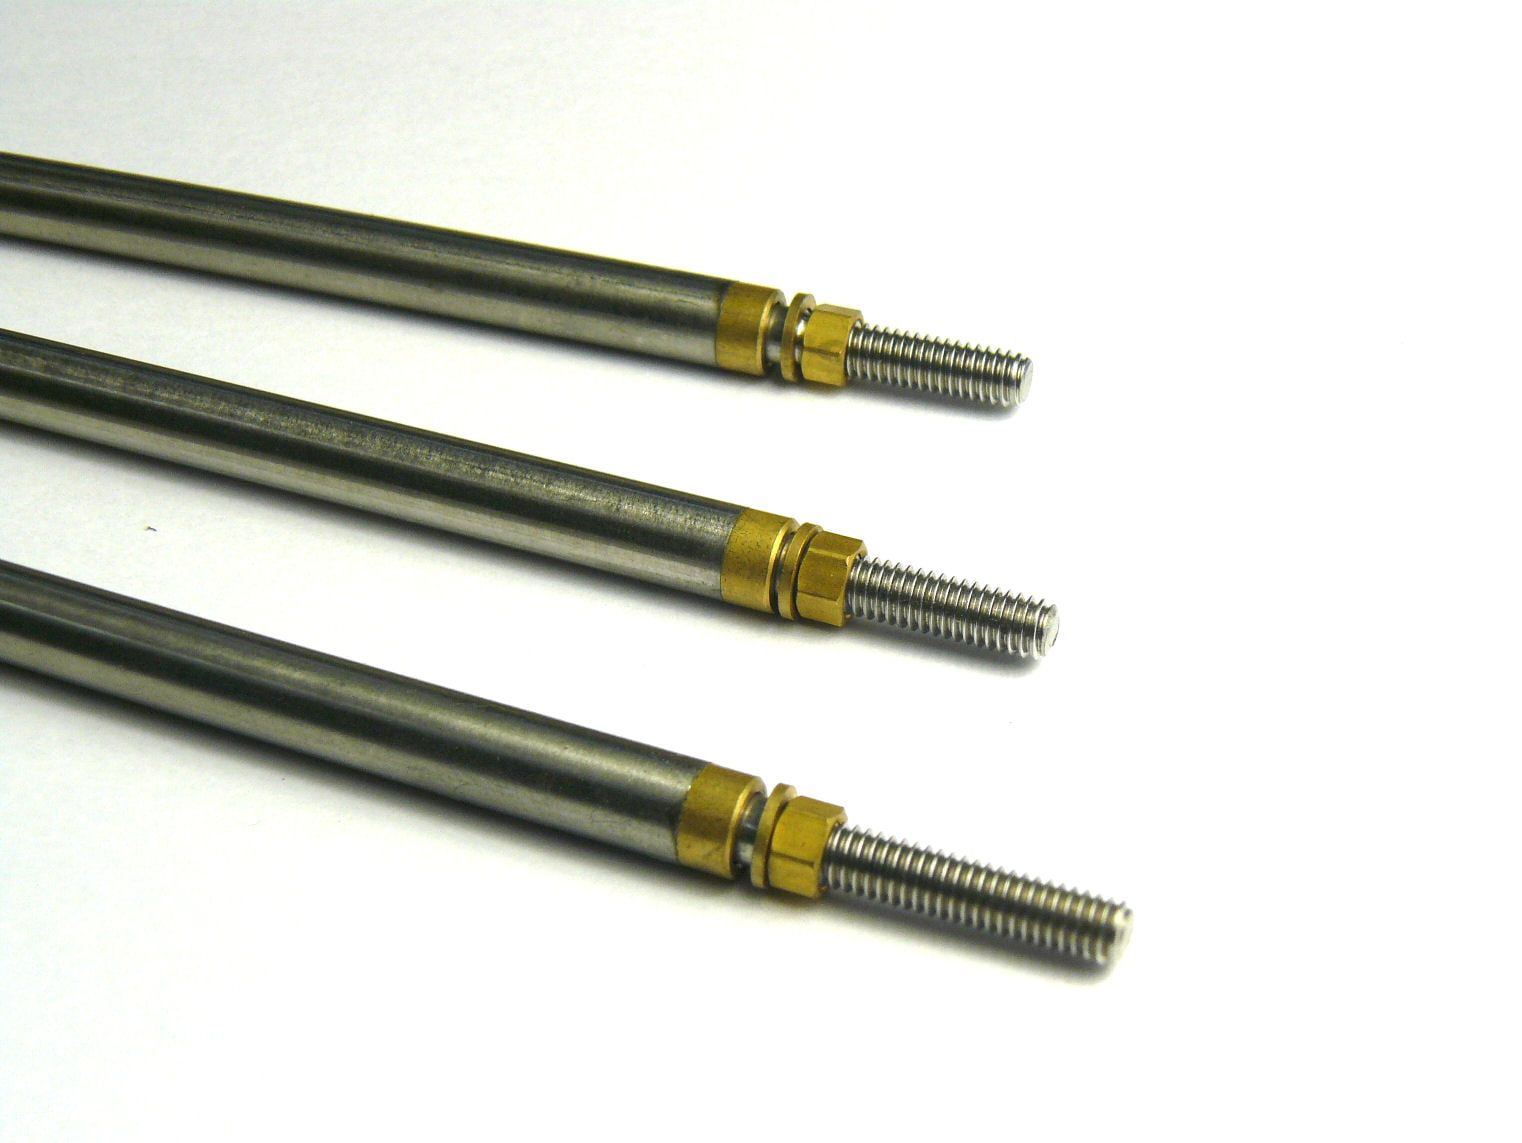 M4 Fine Line Stainless Prop Shafts